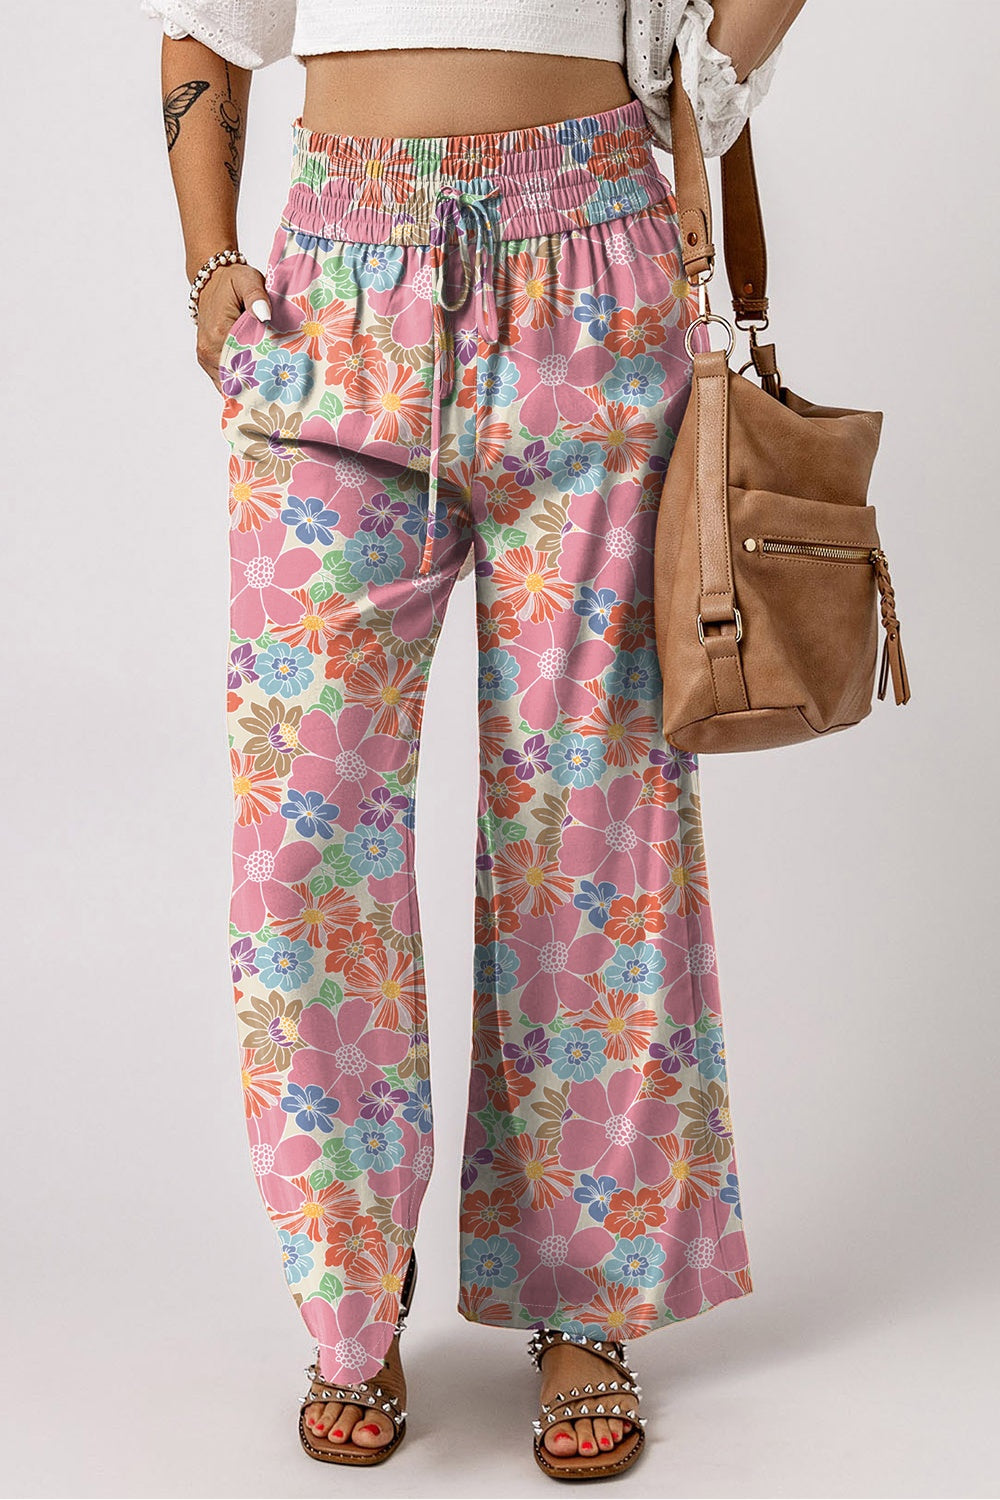 Step into spring with our floral patterned wide leg pants, perfect for versatile styling and unparalleled comfort.